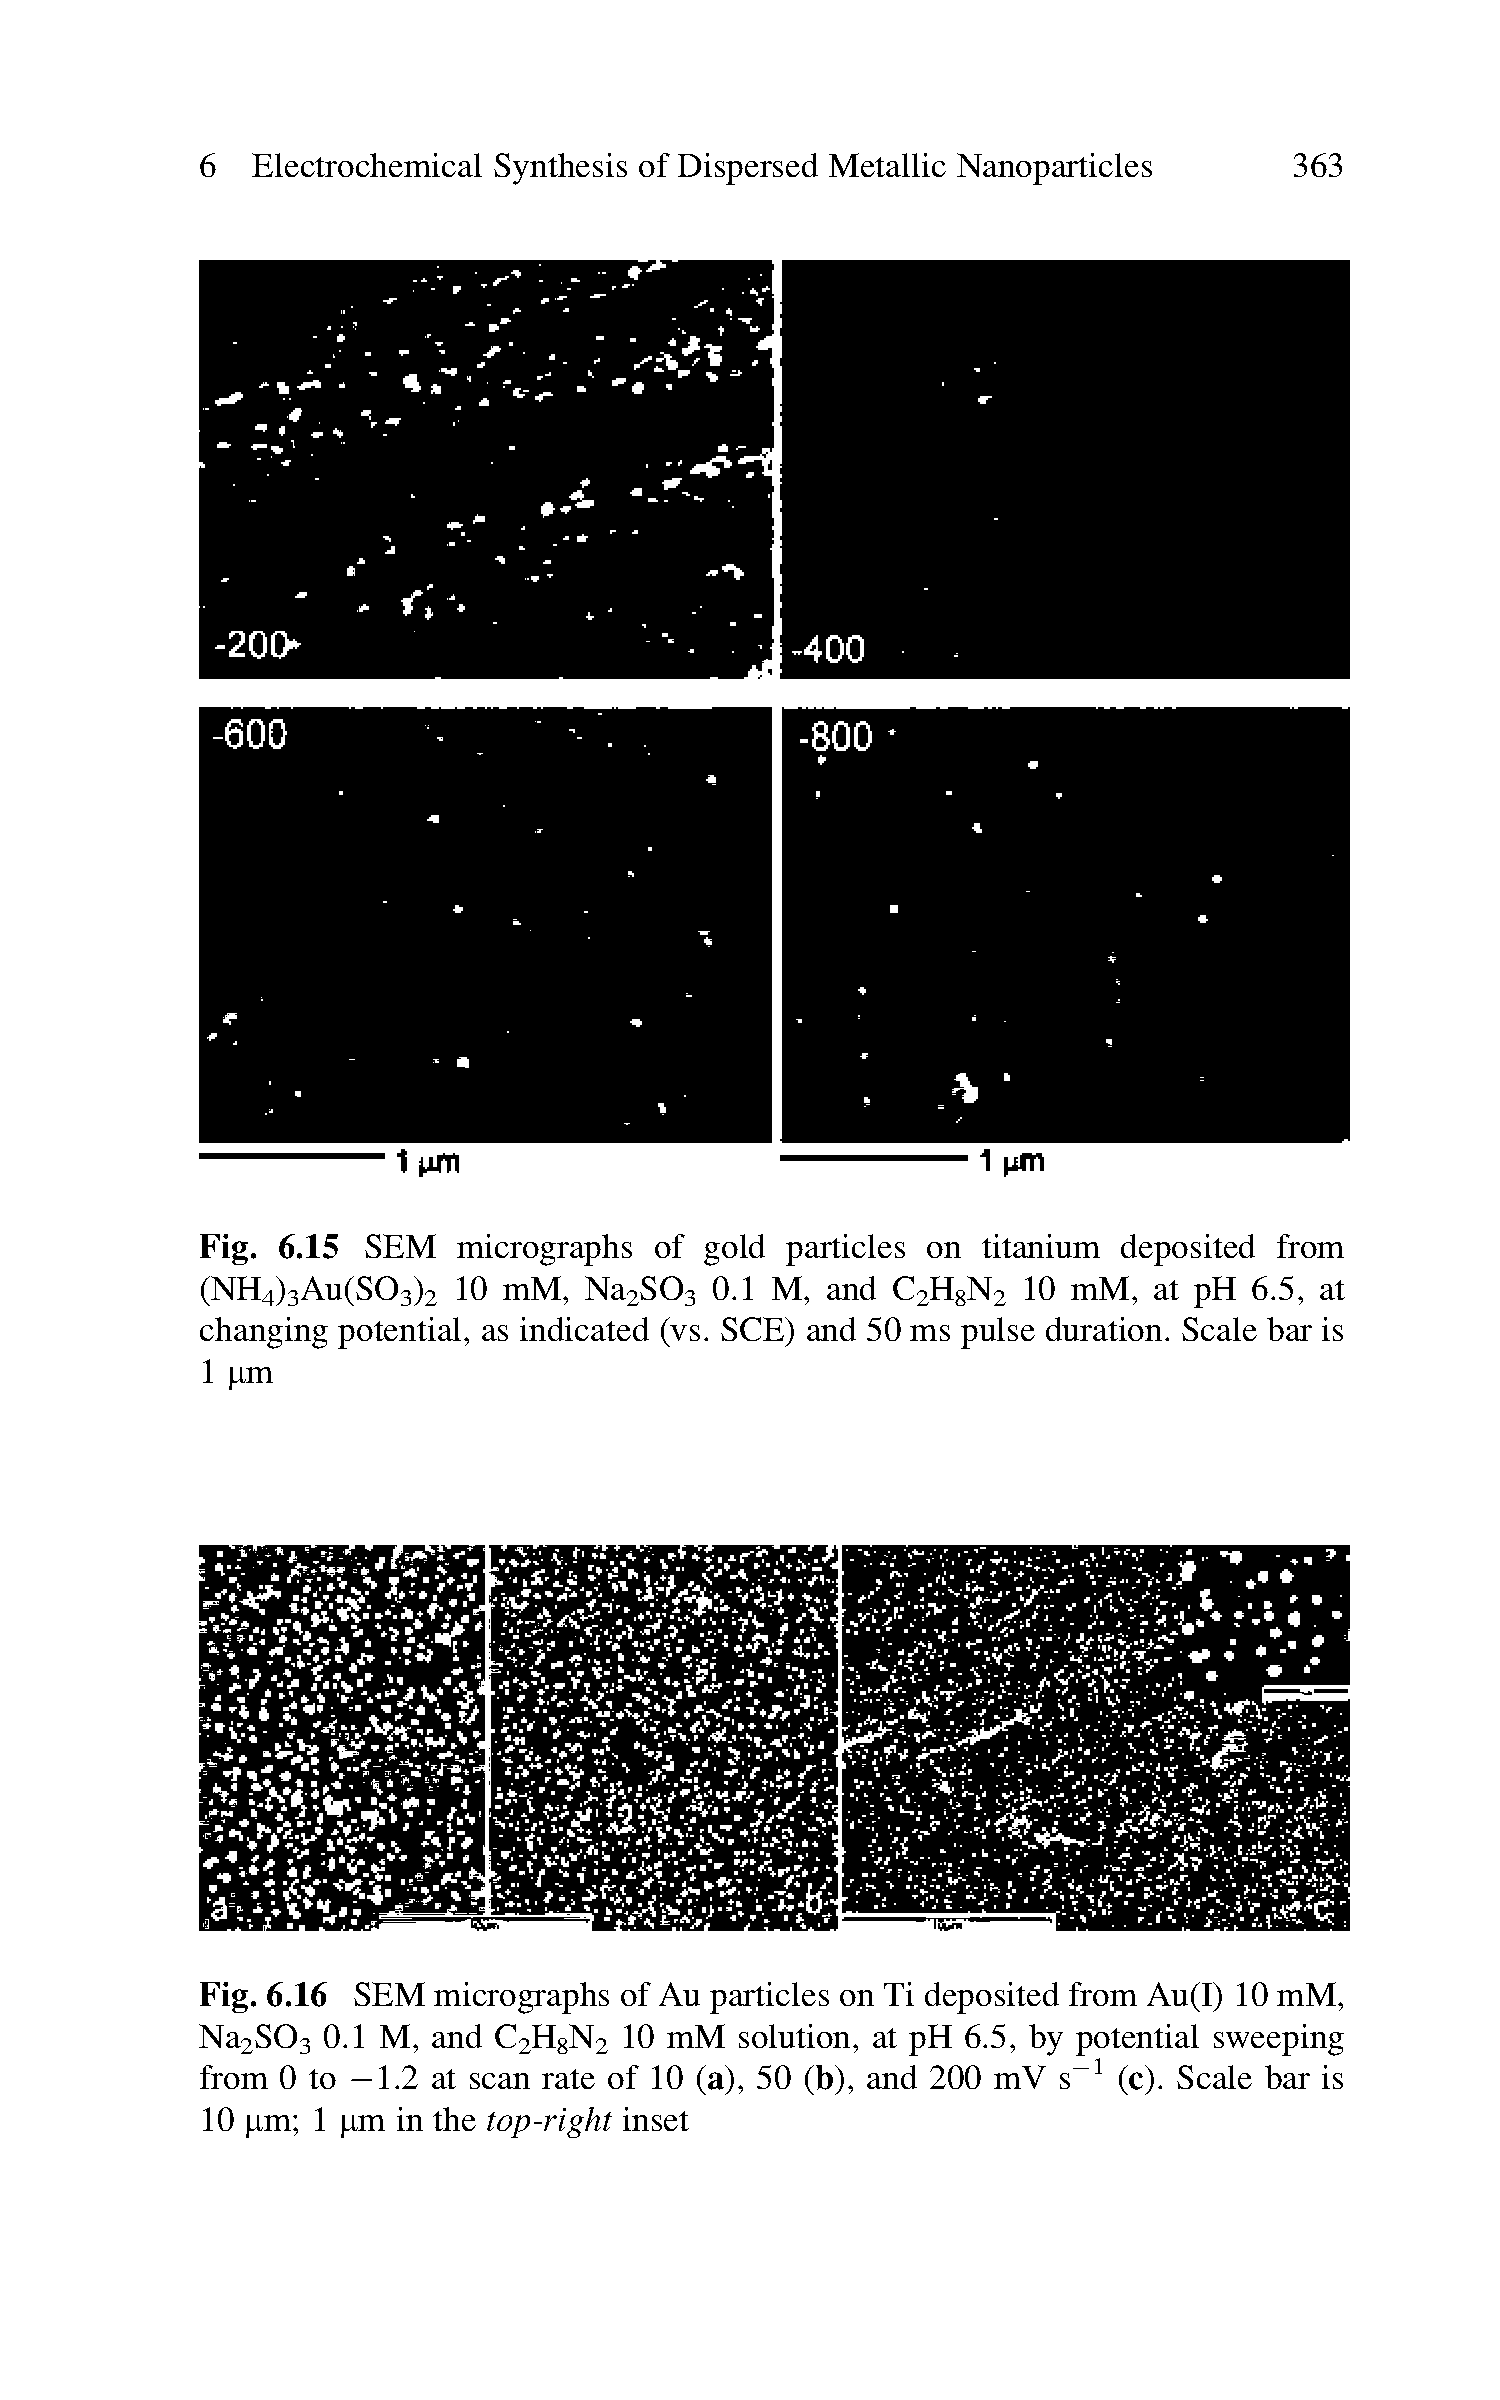 Fig. 6.15 SEM micrographs of gold particles on titanium deposited from (NH4)3Au(S03)2 10 mM, Na2S03 0.1 M, and C2HgN2 10 mM, at pH 6.5, at changing potential, as indicated (vs. SCE) and 50 ms pulse duration. Scale bar is 1 pm...